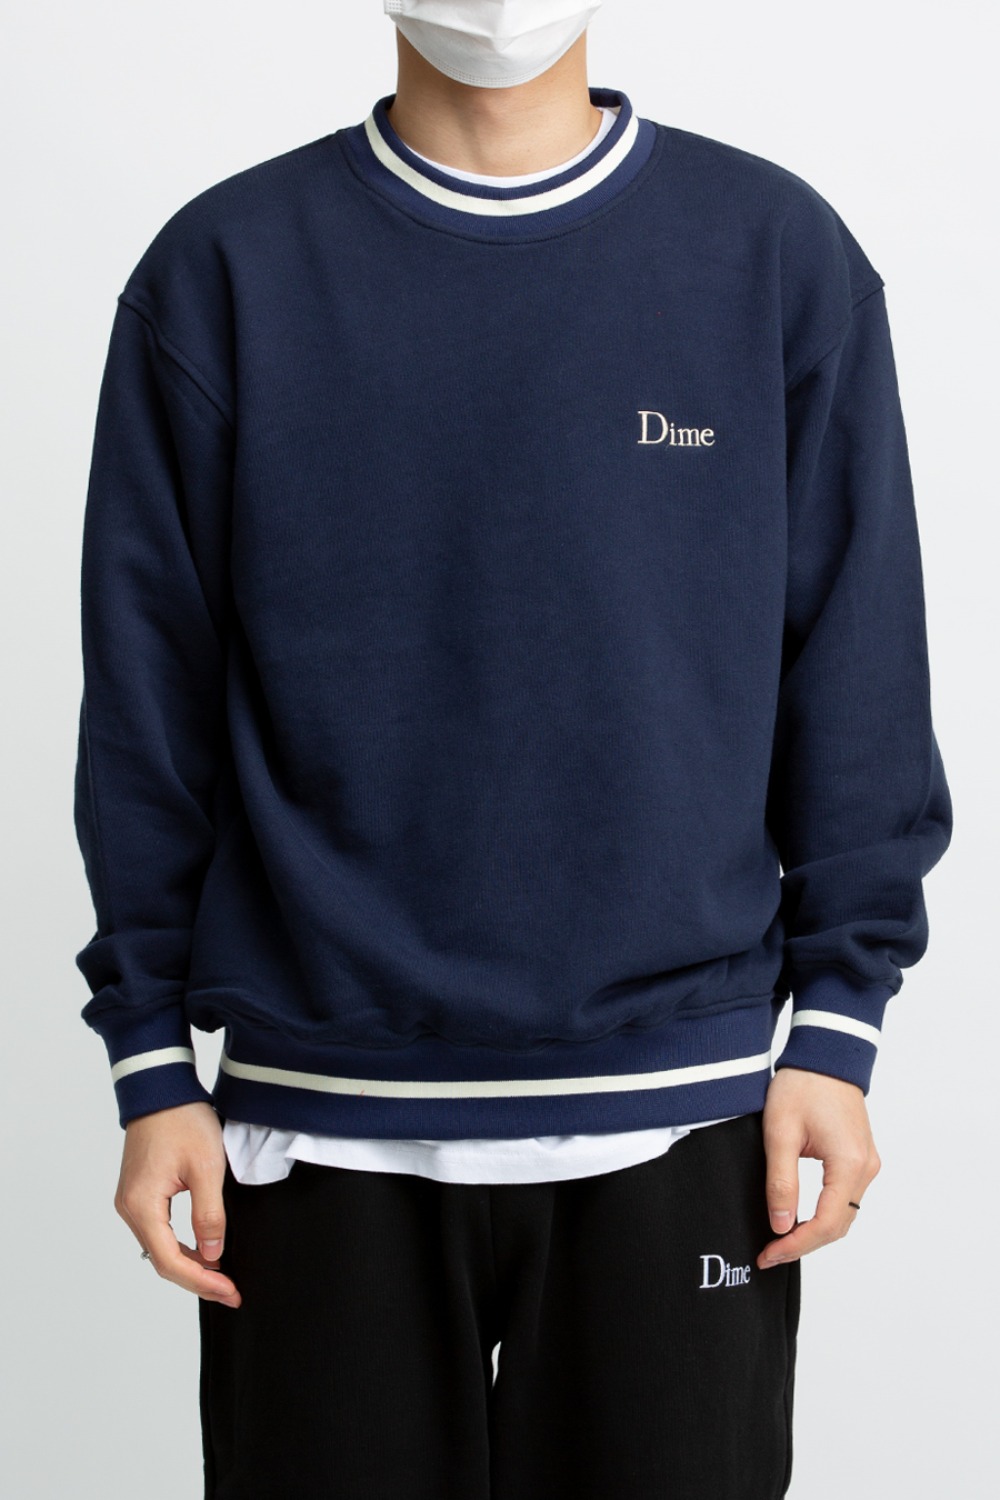 DIME CLASSIC FRENCH TERRY CREWNECK NAVY